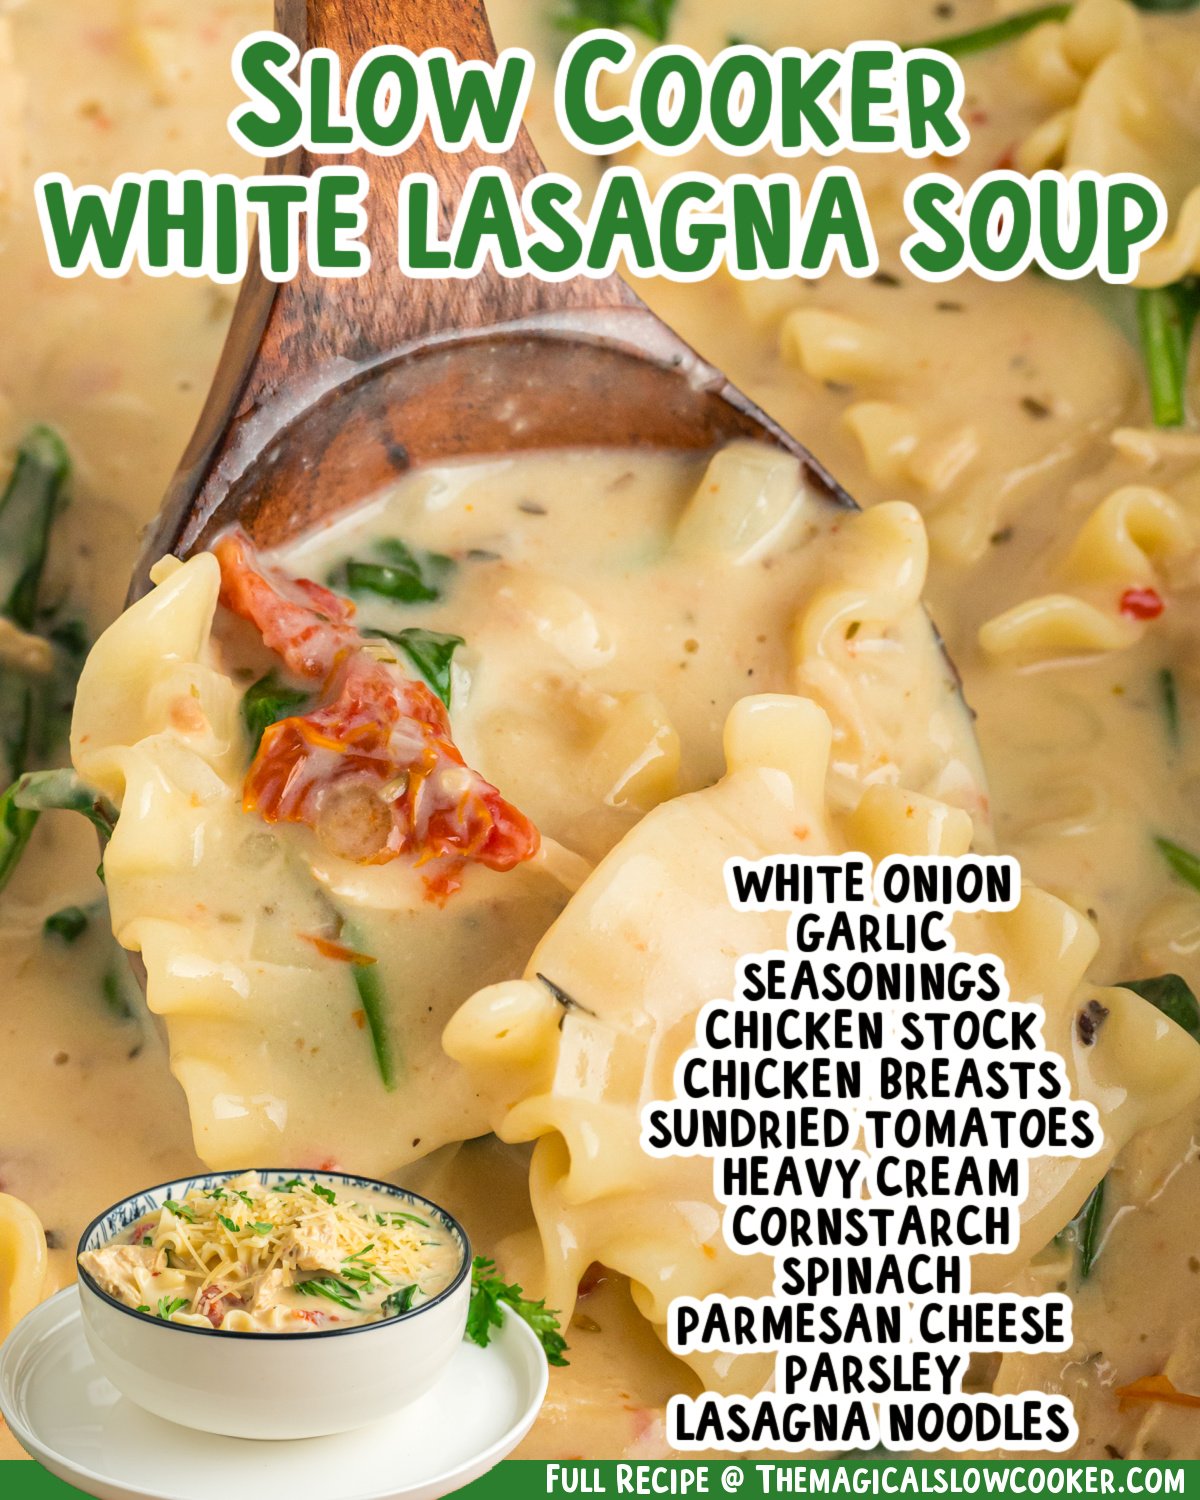 two images of slow cooker white lasagna soup with text list of ingredients.